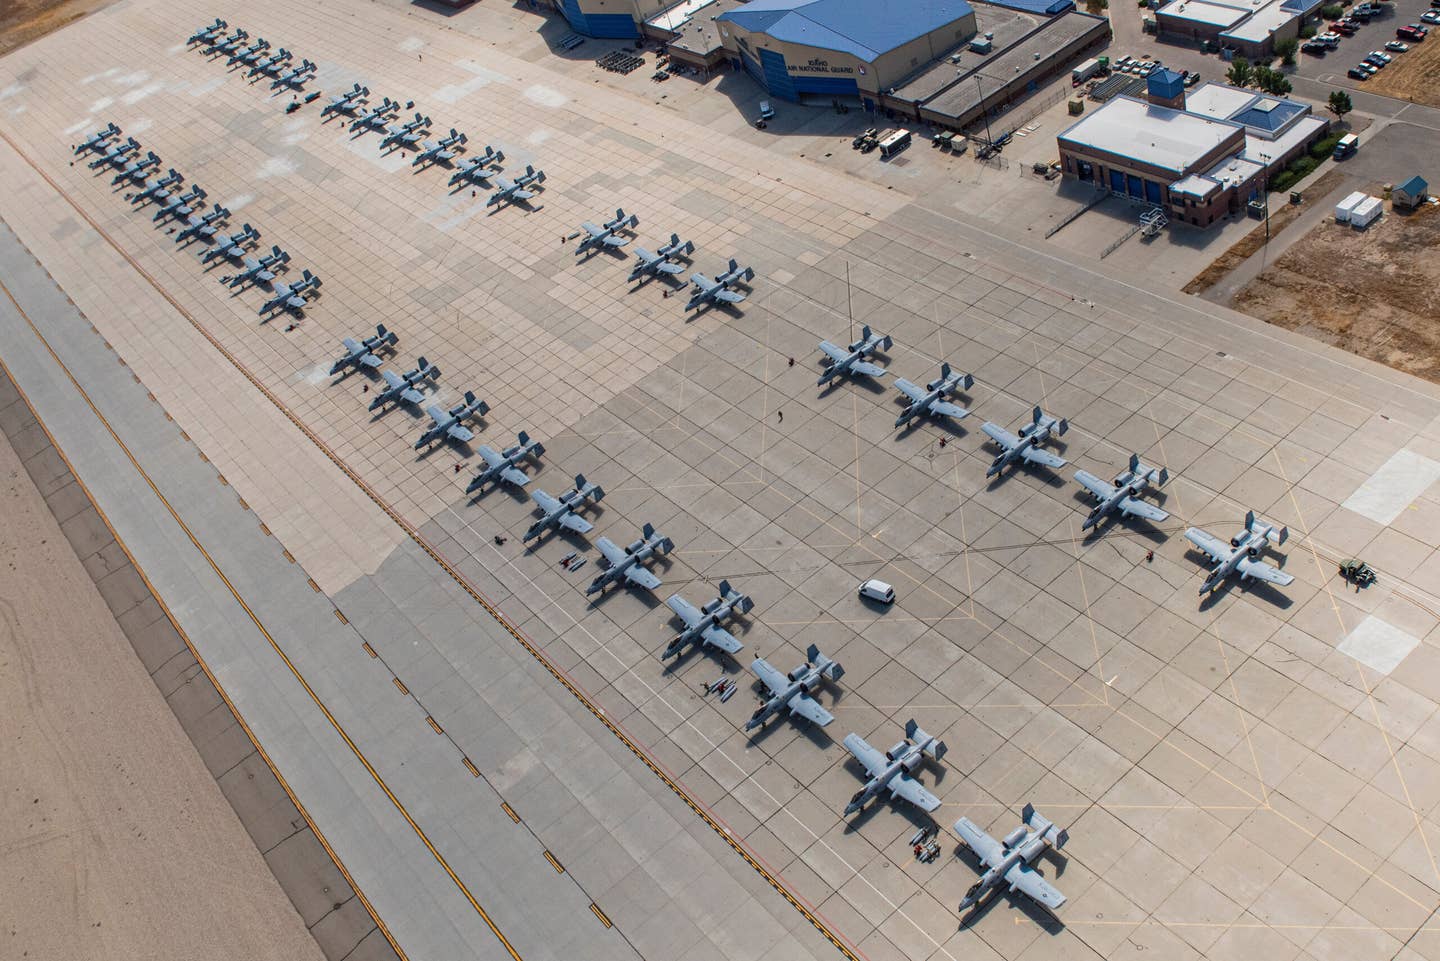 On Sept. 7, over 30 A-10s from across the nation parked at Gowen Field's flightline in preparation for the competition. <em>Credit: U.S. Air National Guard photo by Master Sgt. Becky Vanshur</em>